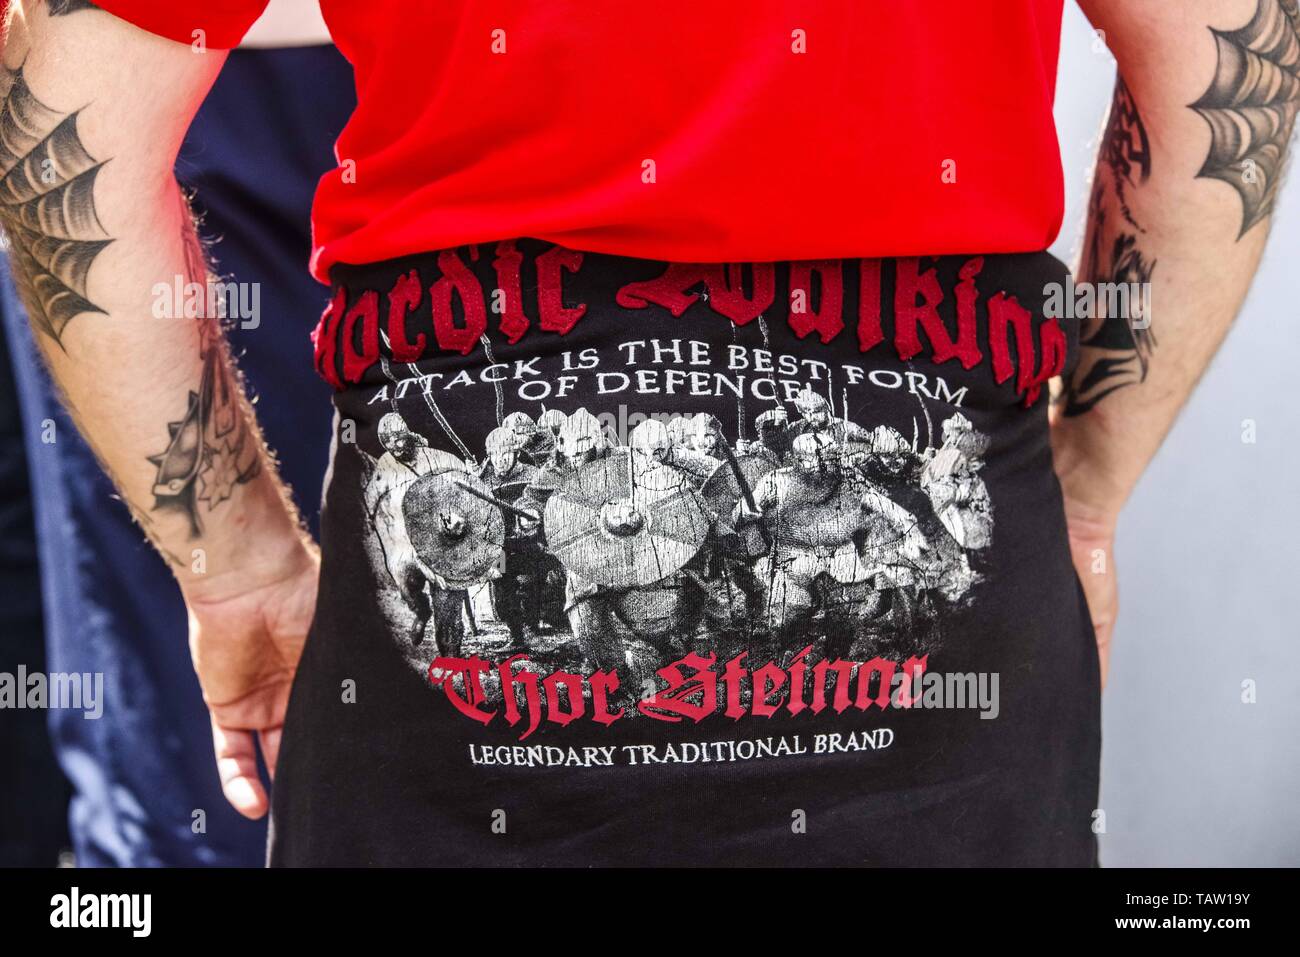 Dortmund, Nordrhein Westfalen, Germany. 25th May, 2019. A neonazi in Dortmund, Germany wears a shirt from the company Thor Steinar, which is marketed towards right-extremists. Prior to the European Elections, the neonazi party Die Rechte (The Right) organized a rally in the German city of Dortmund to promote their candidate, the incarcerated Holocaust denier Ursula Haverbeck. The demonstration and march were organized by prominent local political figure and neonazi activist Michael Brueck (Michael BrÃ¼ck) who enlisted the help of not only German neonazis, but also assistance from Russian, Bul Stock Photo